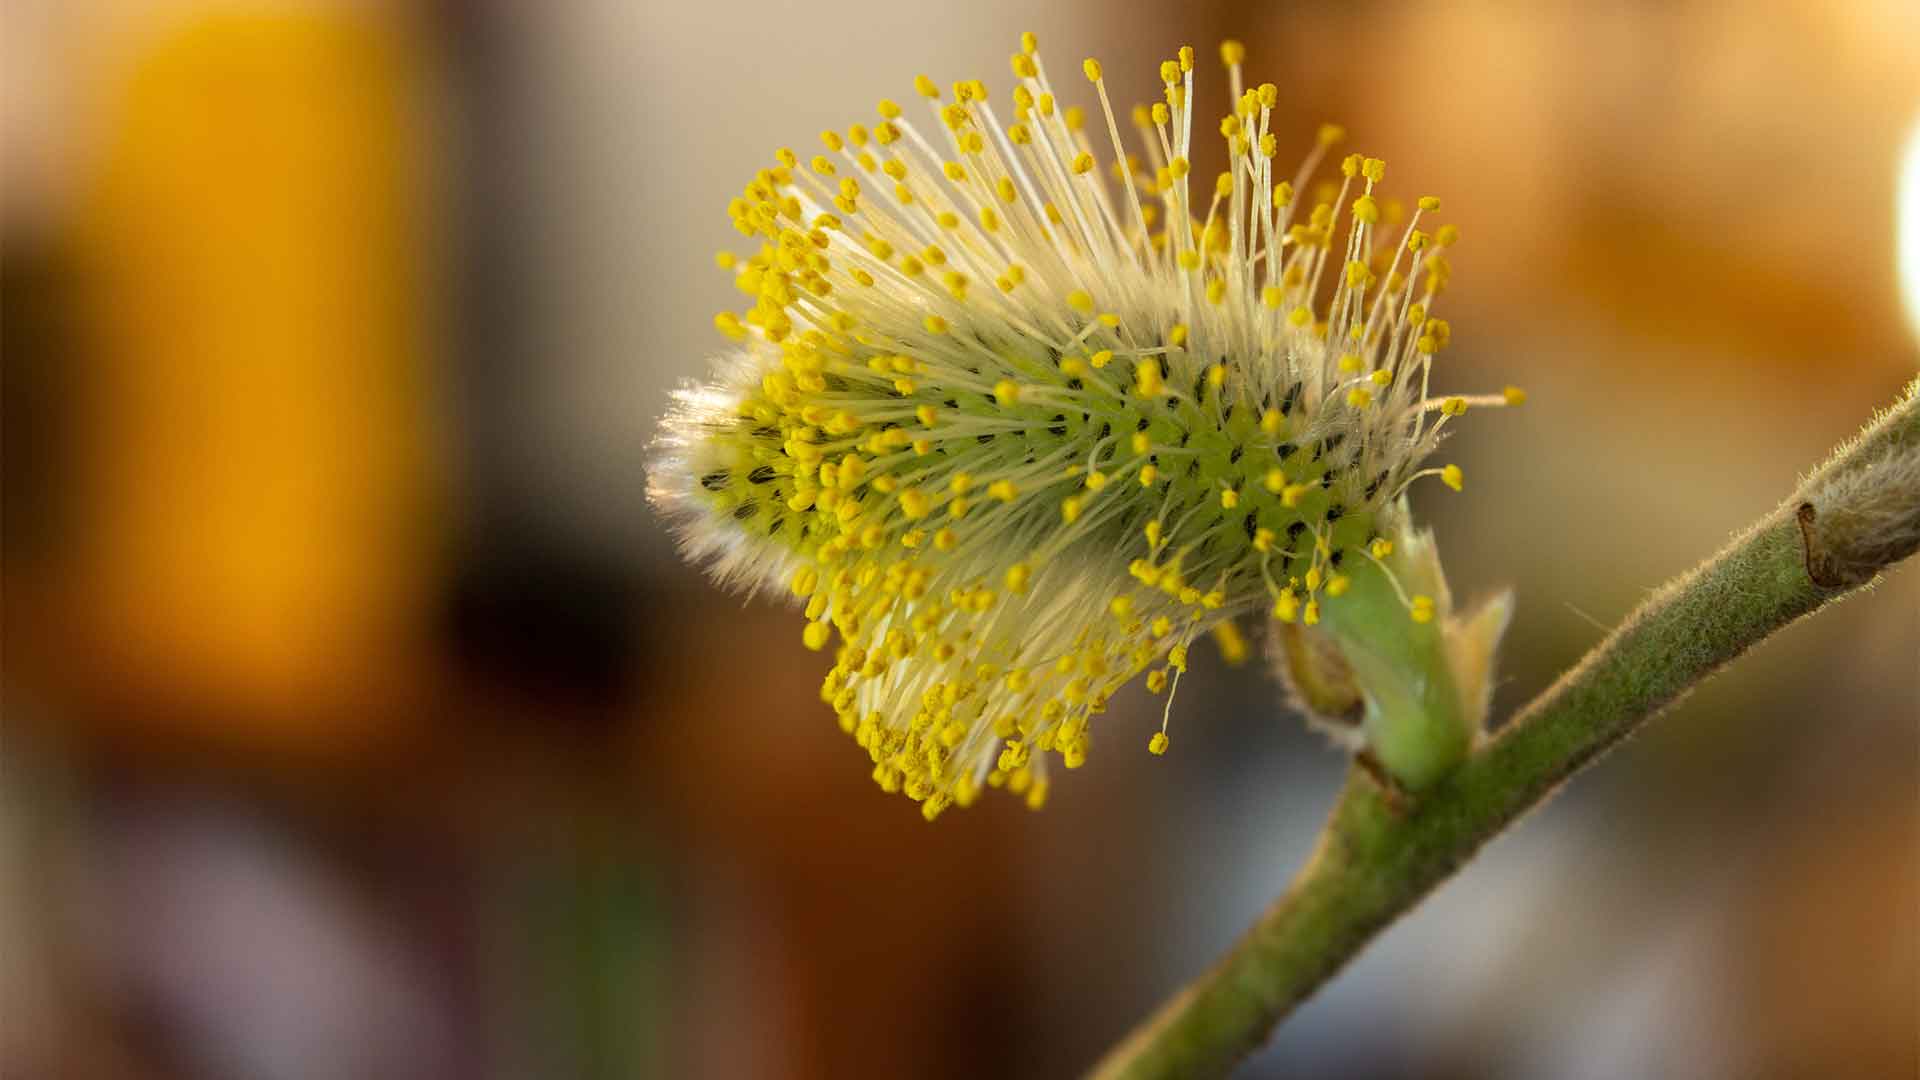 A flower without petals, called a catkin, on a branch